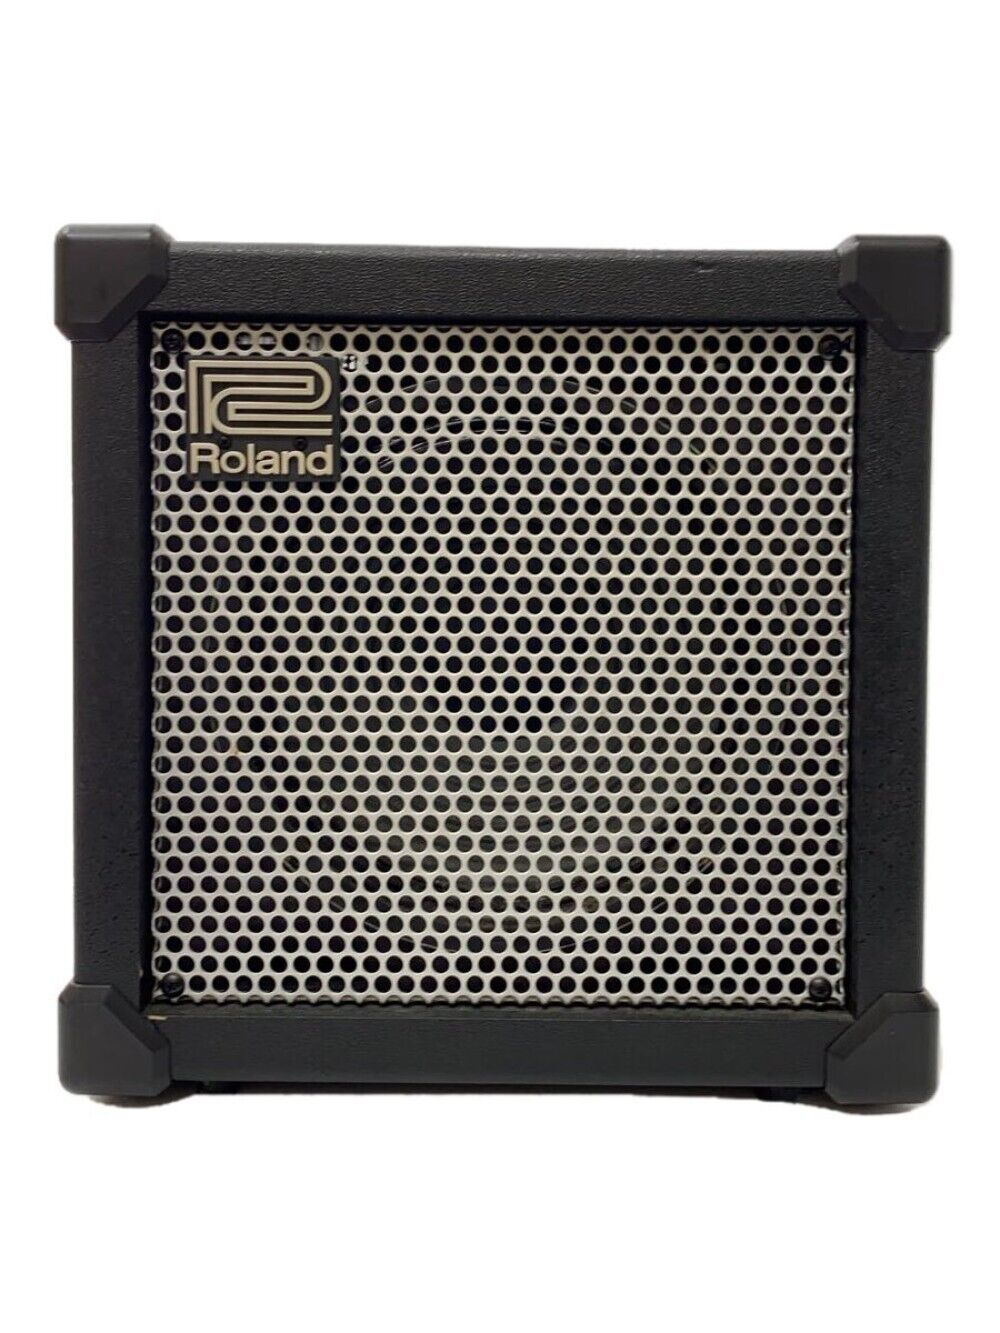 Roland CUBE-40XL Guitar Amplifier Black Used From Japan